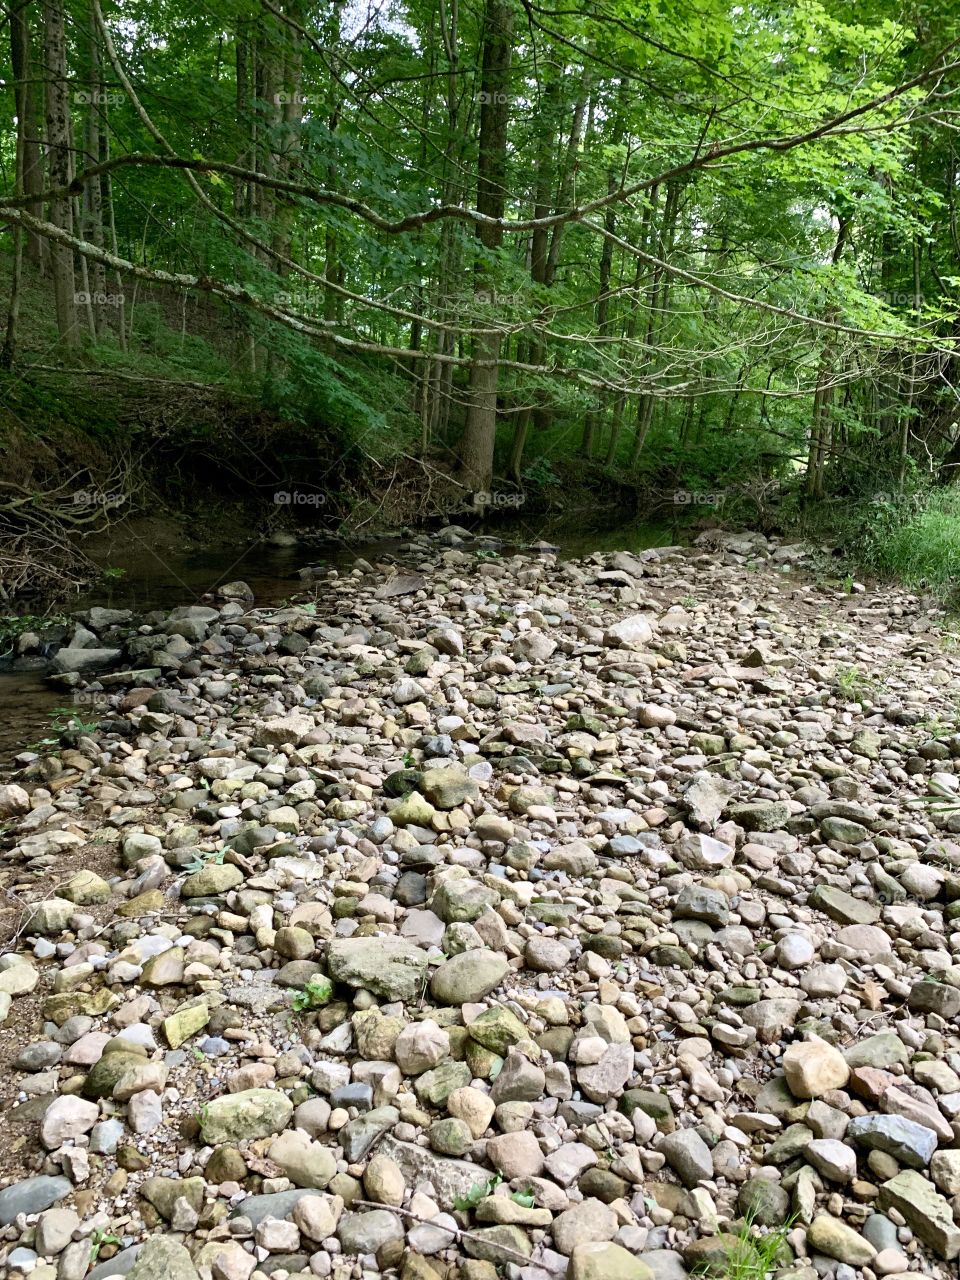 A massive pile of stones from the creek bottom